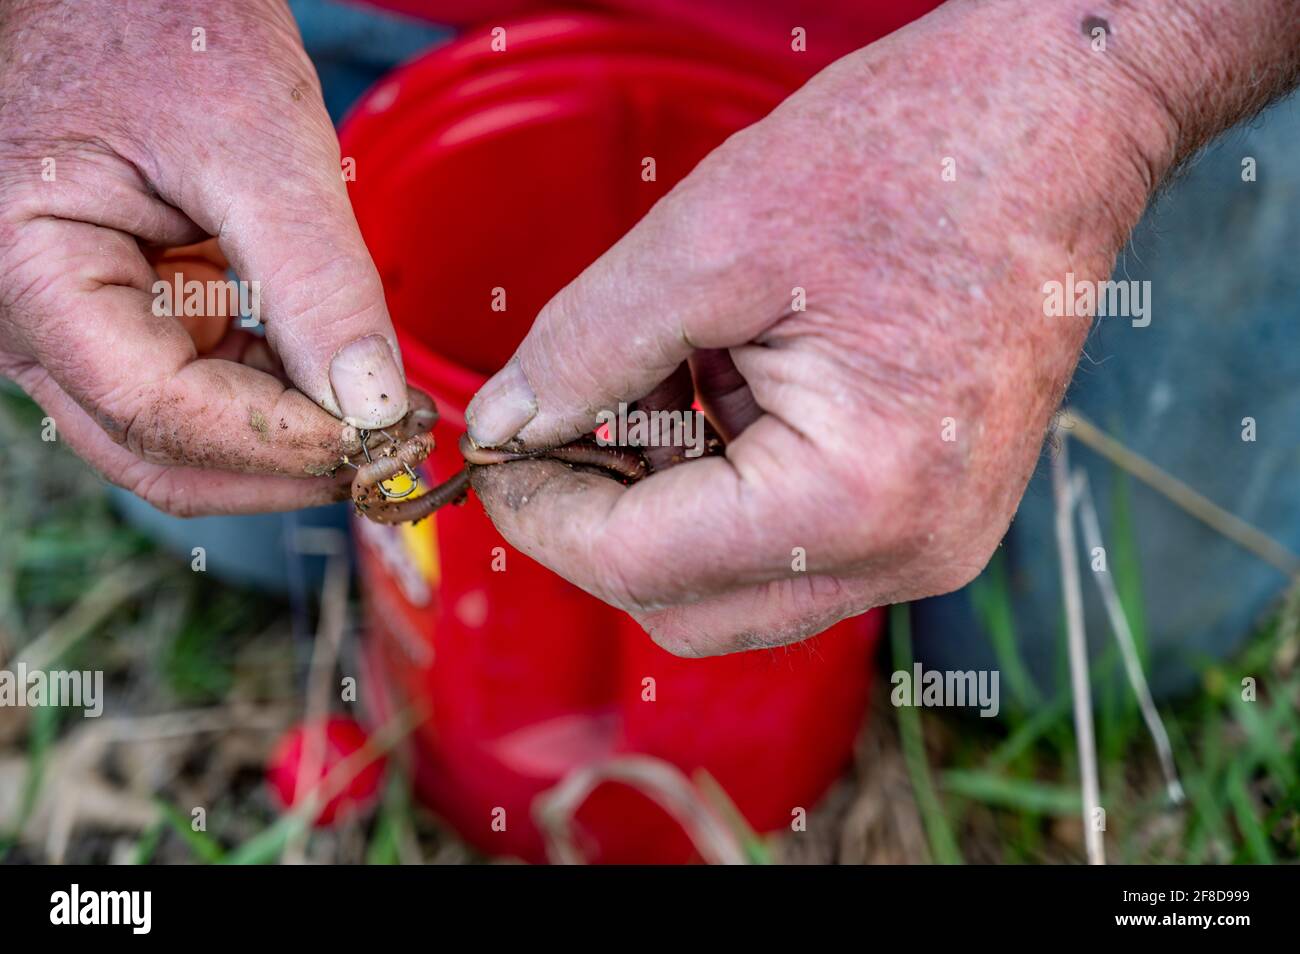 Baiting a hook stock image. Image of dock, dirt, hook - 25743929